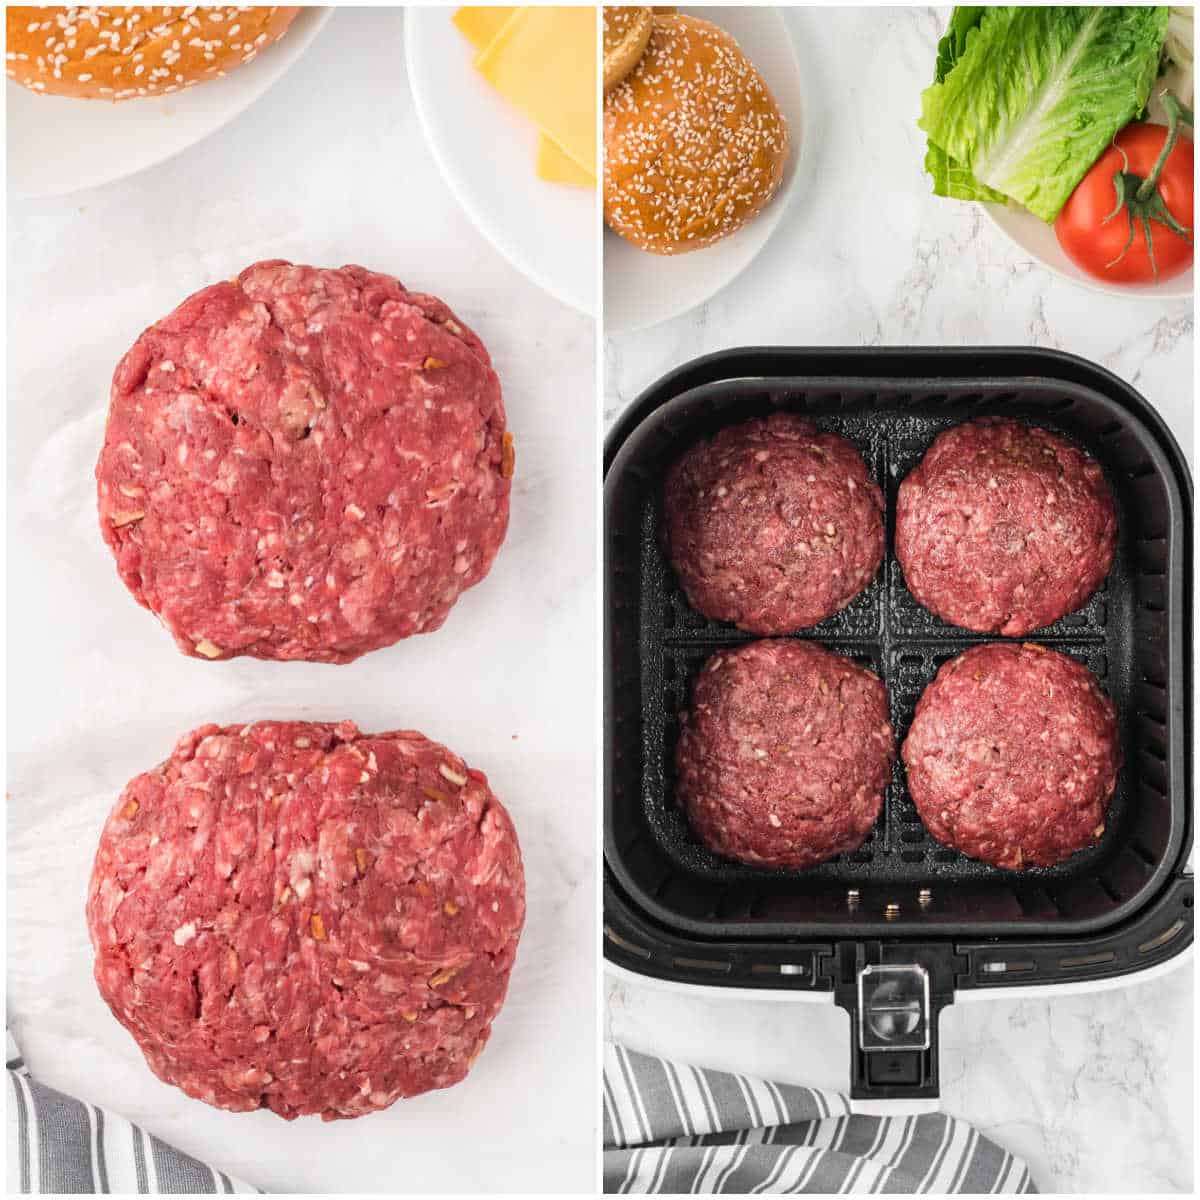 Steps to make juicy lucy burgers.